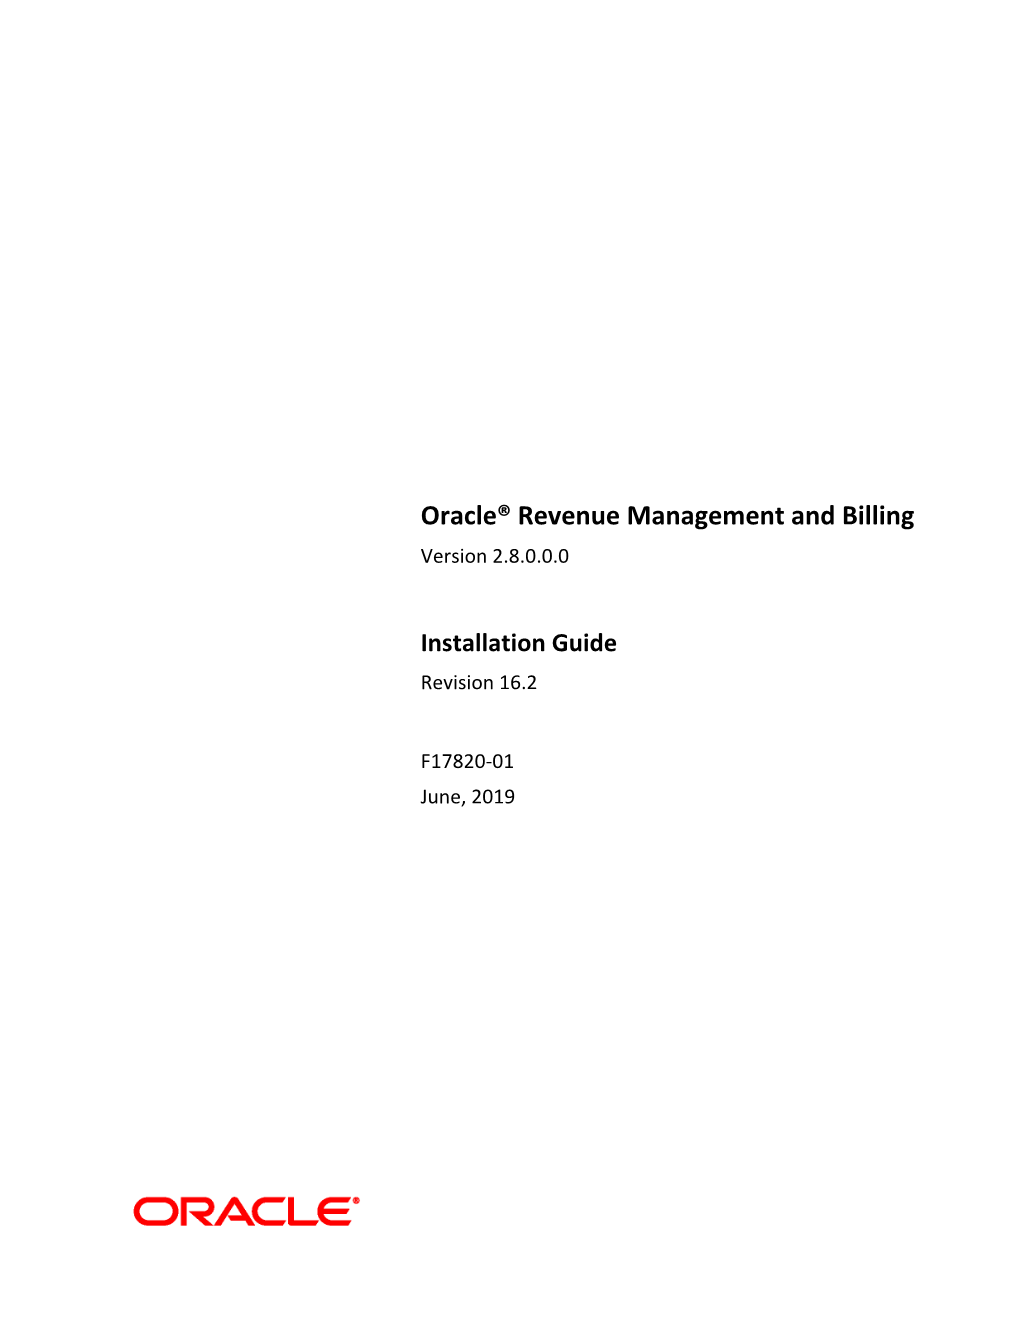 Oracle Revenue Management and Billing Installation Guide